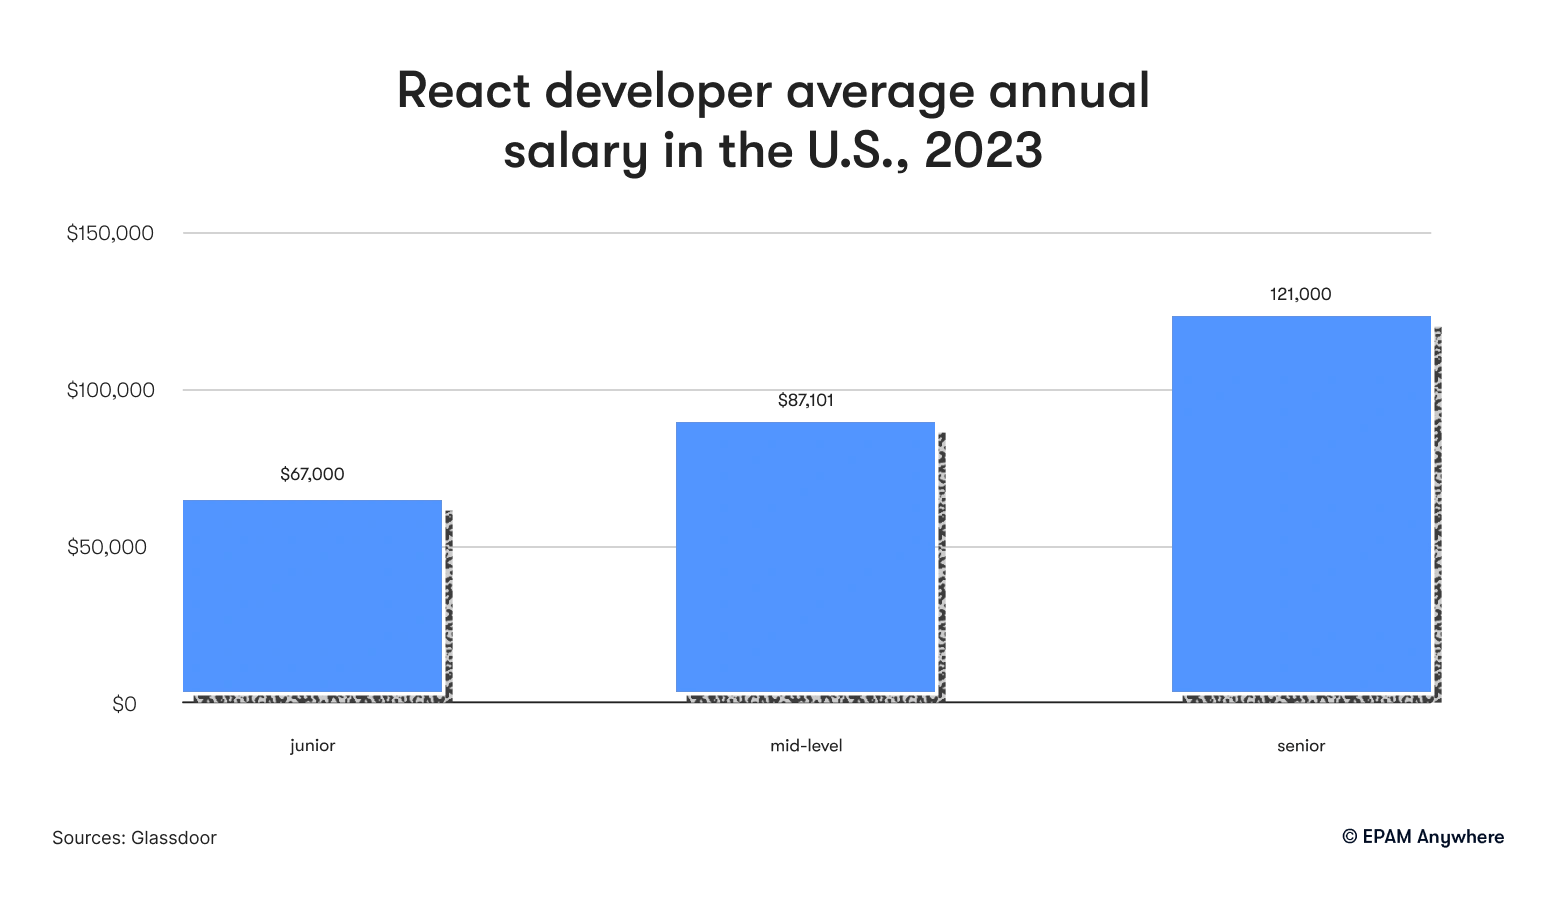 React developer average annual salary in the US, 2023